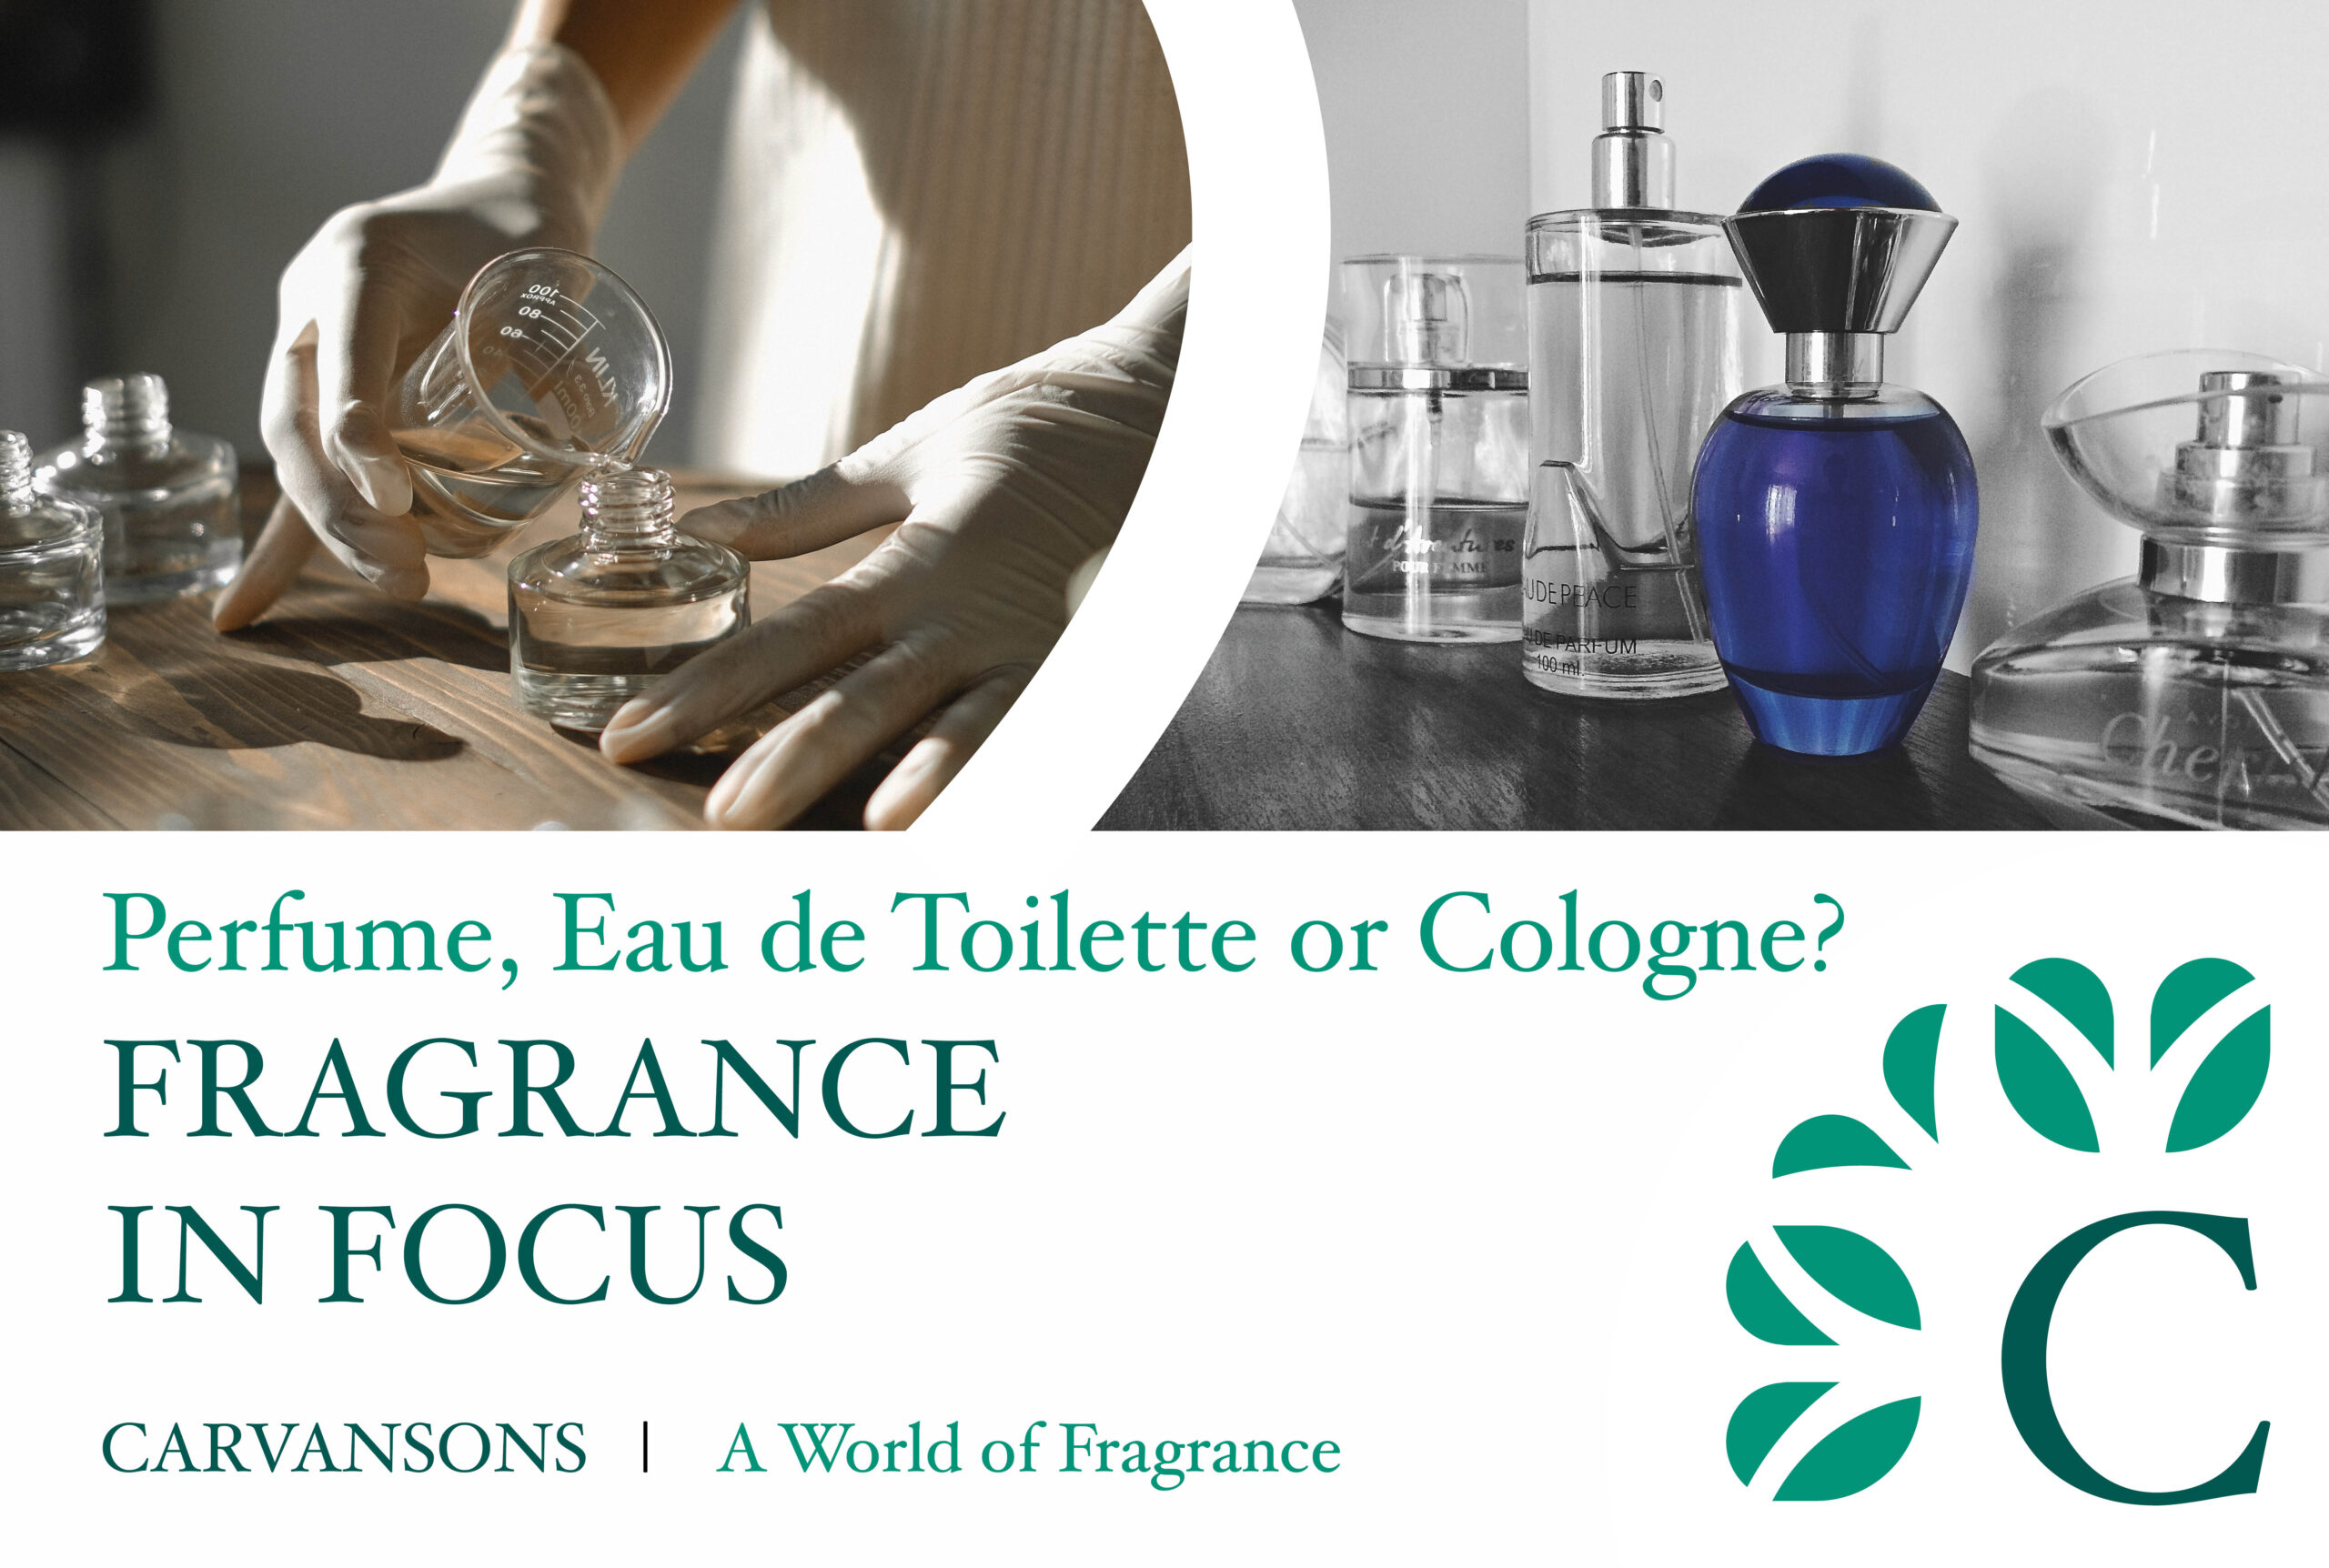 The difference between Perfume and de Toilette